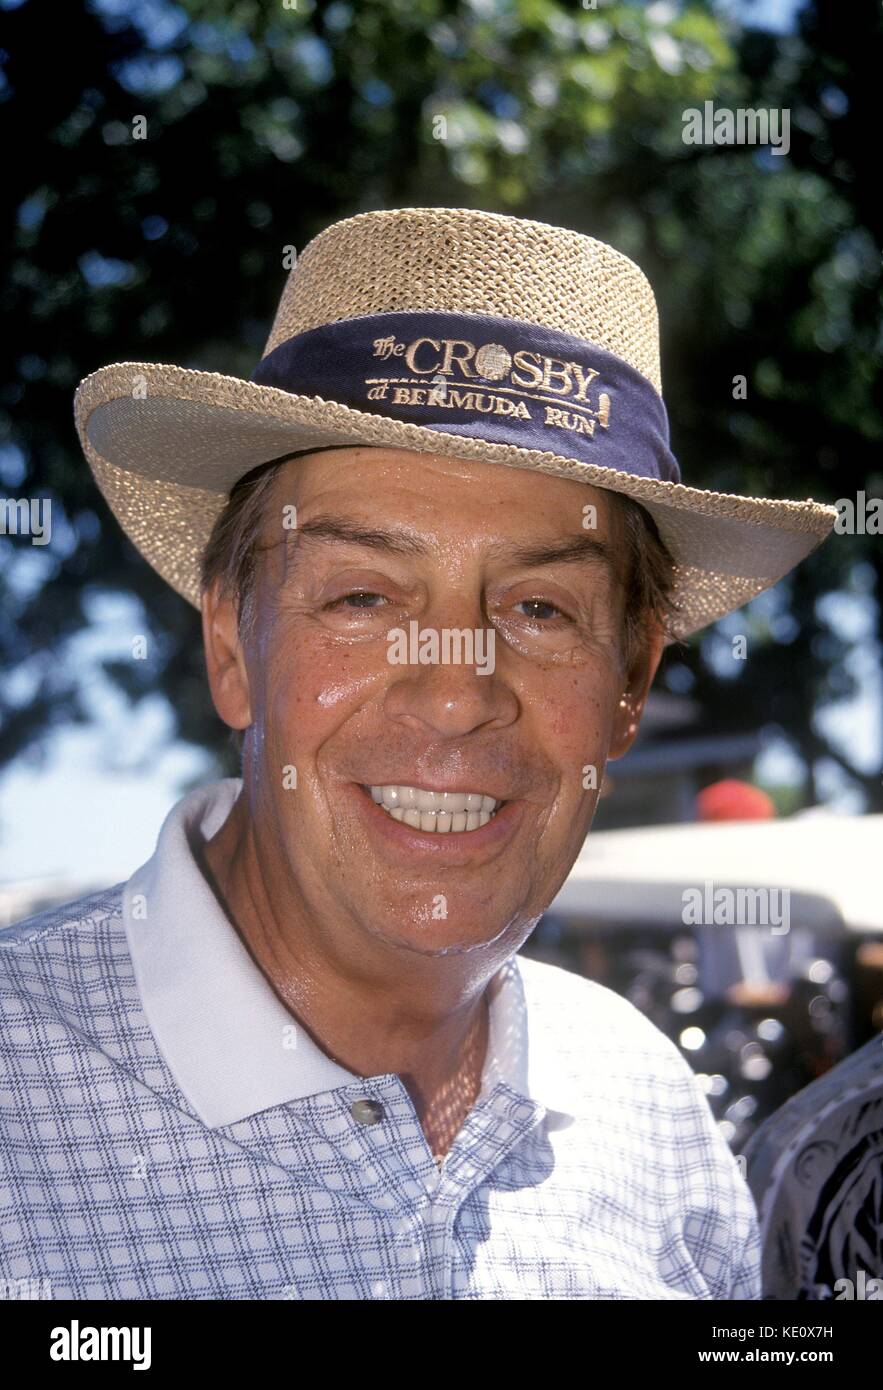 Actor Jerry Orbach at St. Andrew's Golf Club for the Carol M. Baldwin Celebrity Golf Classic. Westchester, NY. July 26, 1999. © Joseph Marzullo / MediaPunch. Stock Photo